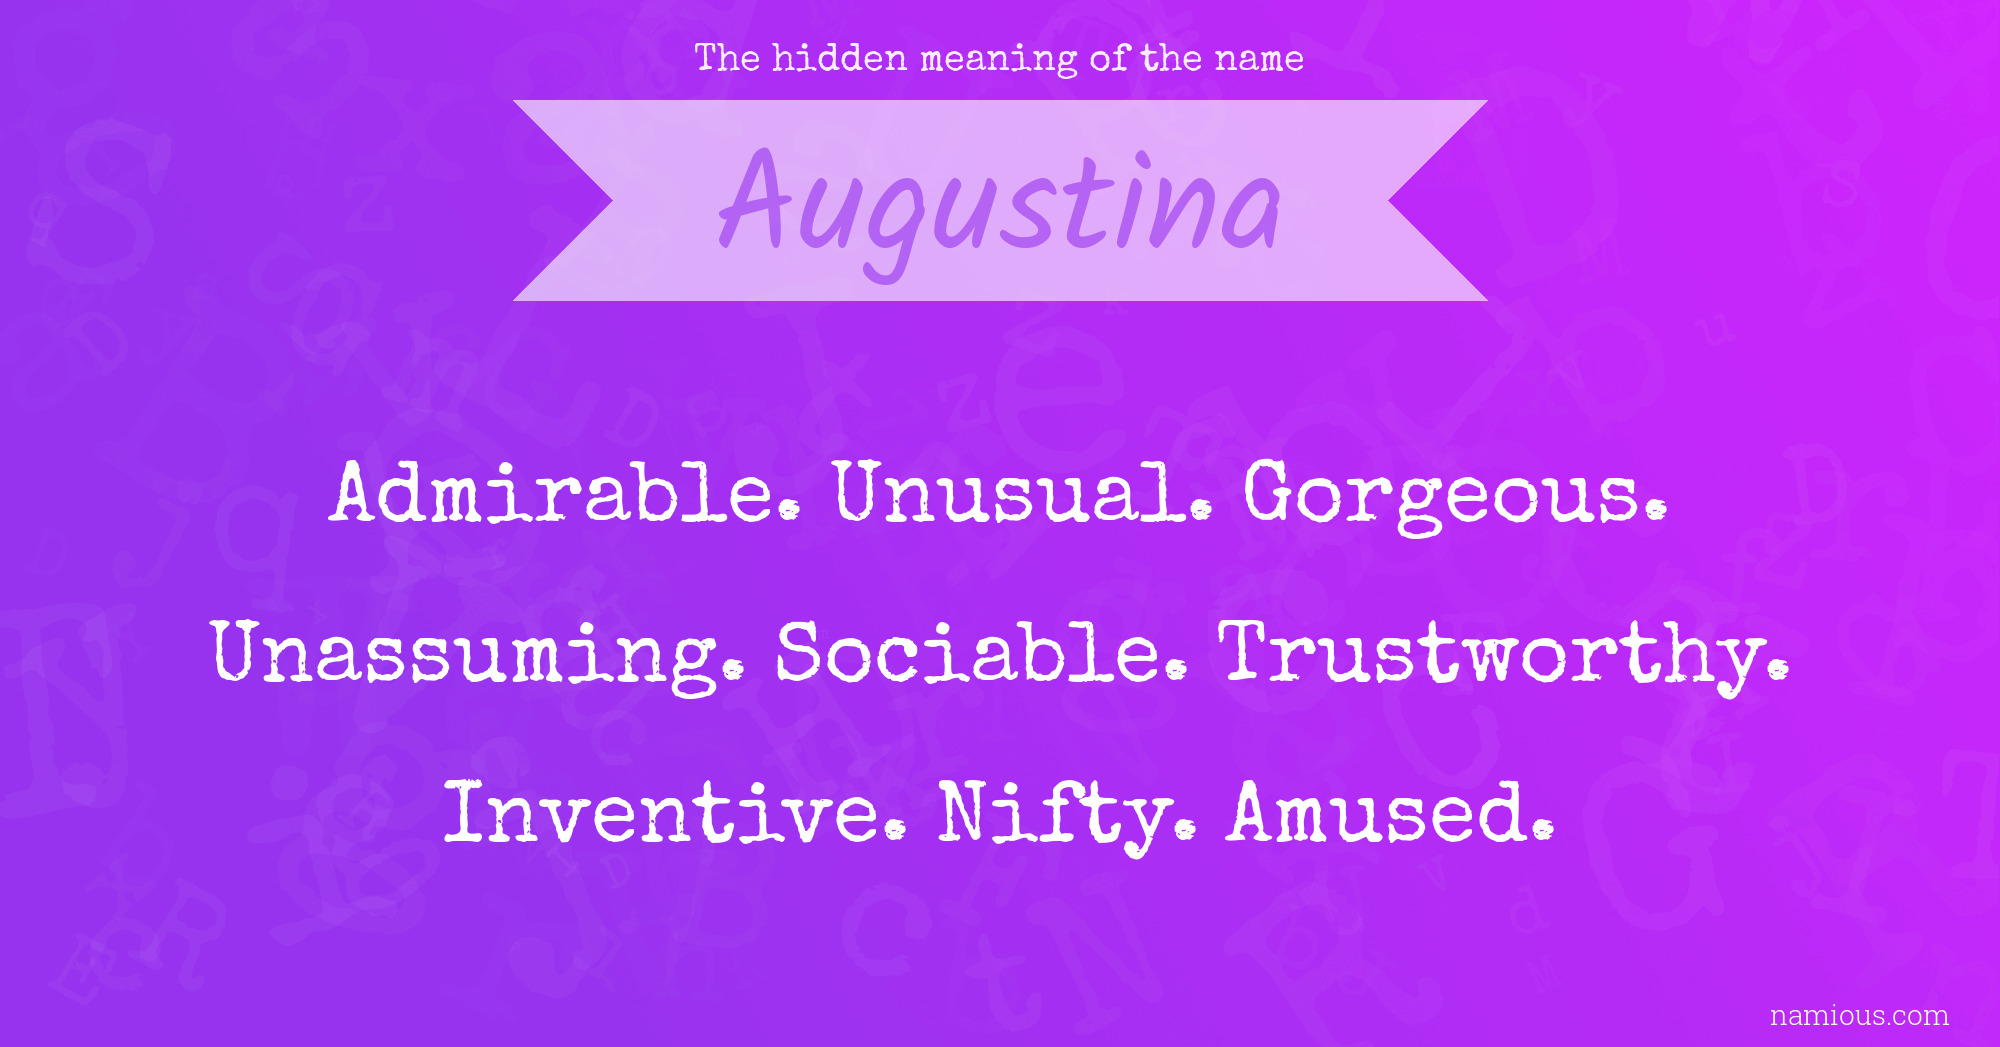 The hidden meaning of the name Augustina